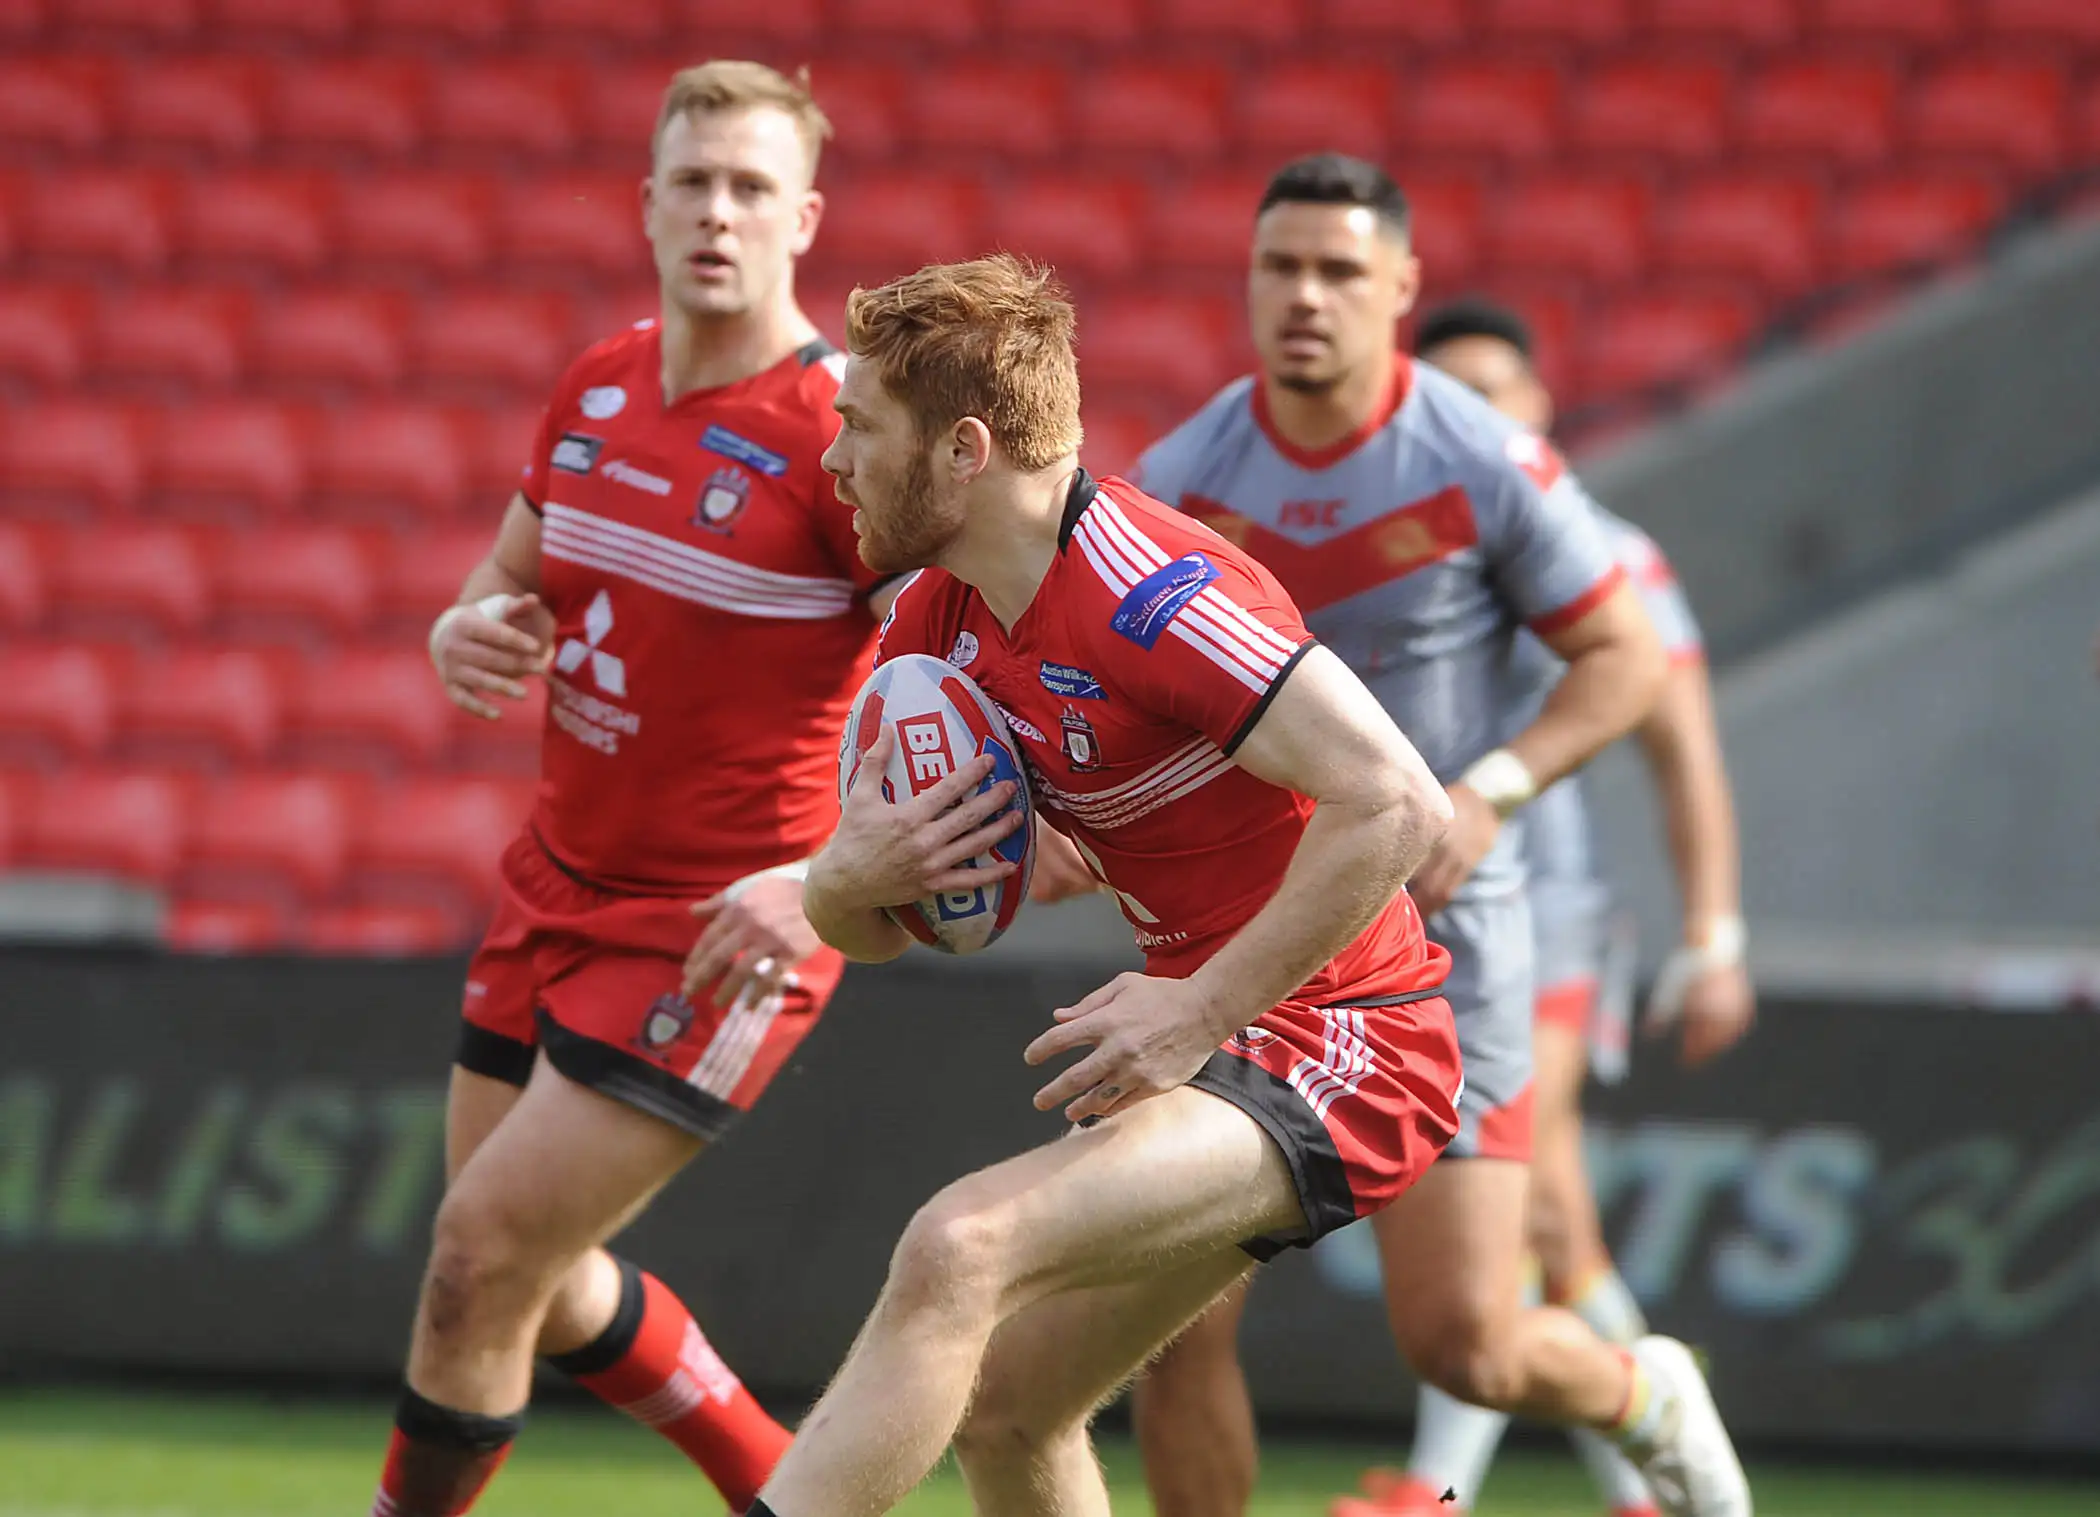 Salford want to go 7/7 in The Qualifiers